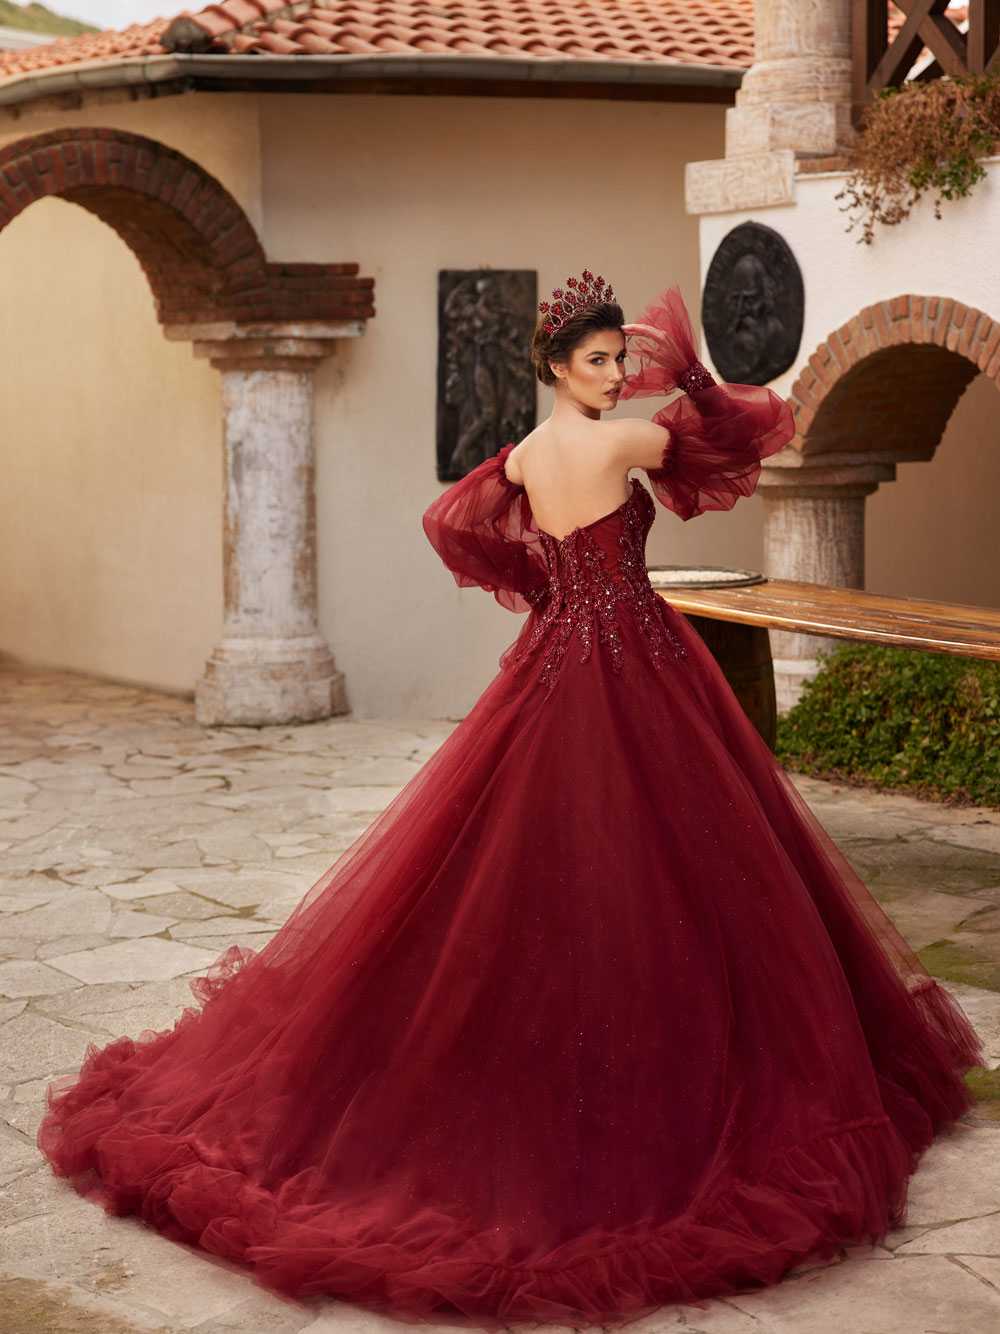 buy Maroon Long Frill Hemline Sweetheart Strapless Bodice Sequin Embellished Tulle Ball Gown prom gowns online shop